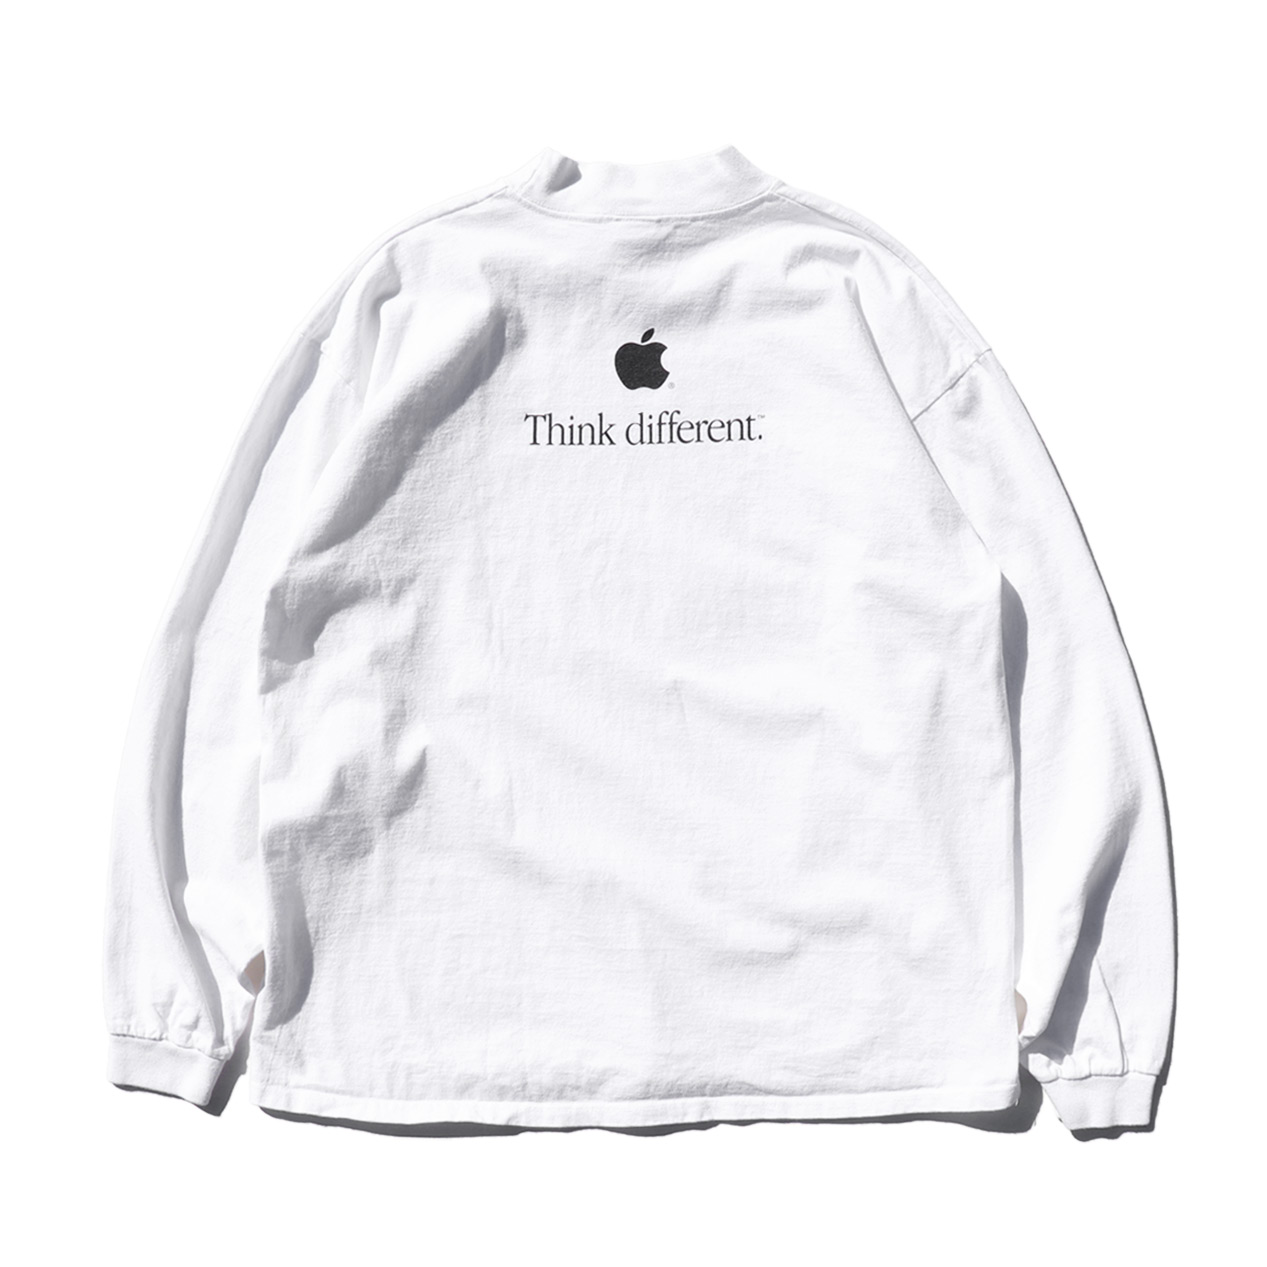 POST JUNK / 90's APPLE “THINK DIFFERENT” USA製 ロングスリーブT 